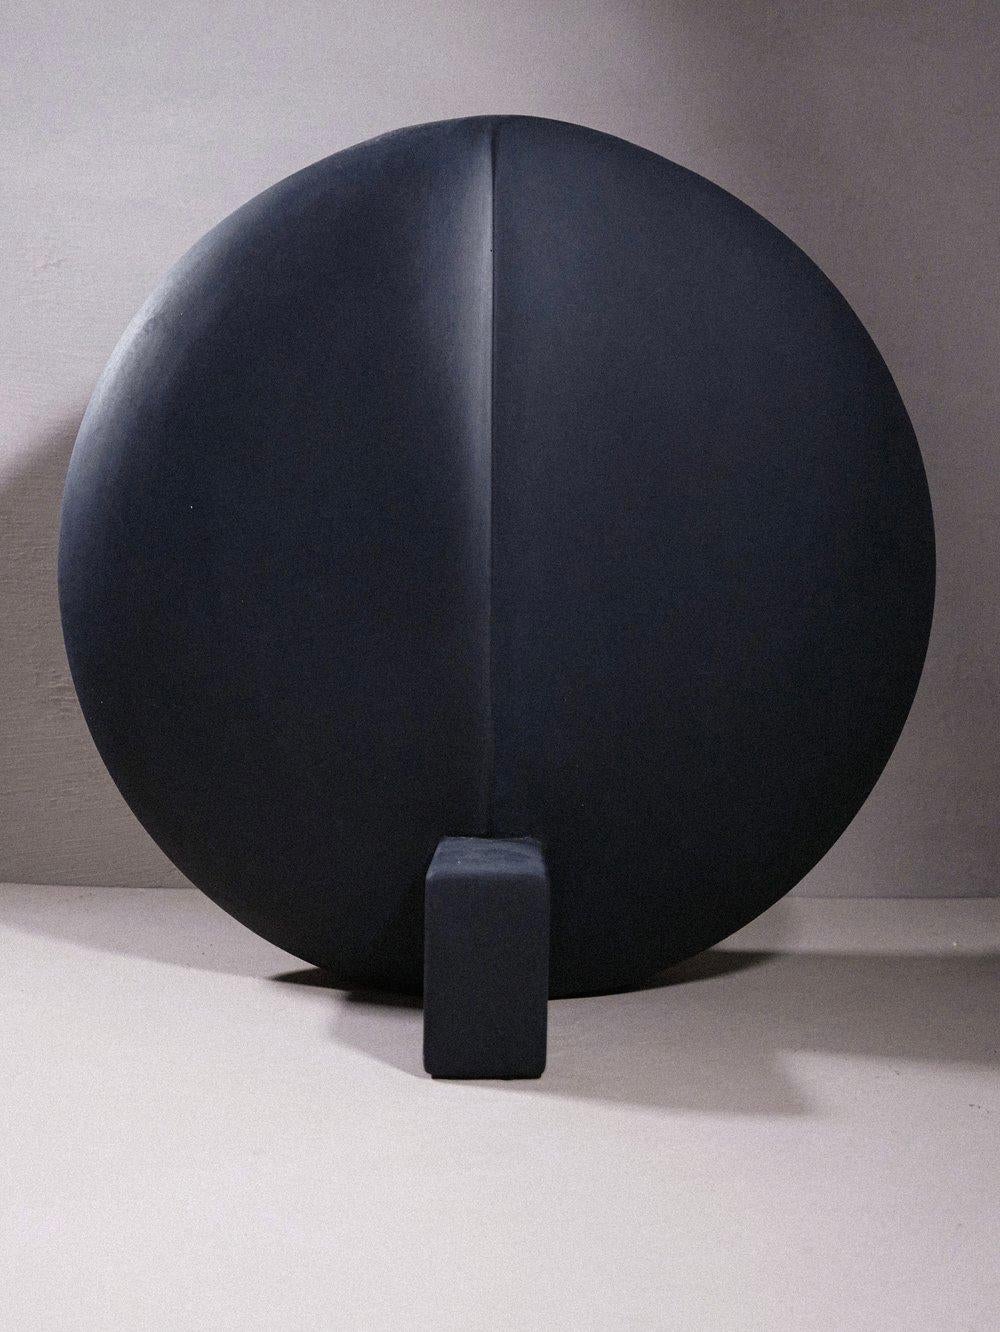 The Guggenheim Vase is a beautiful, black, architectural vase designed by 101 Copenhagen and hand-finished in Denmark.

Due to the hand-finished matte surface, this vase is not suitable to hold water. It comes with a plastic bag for you to